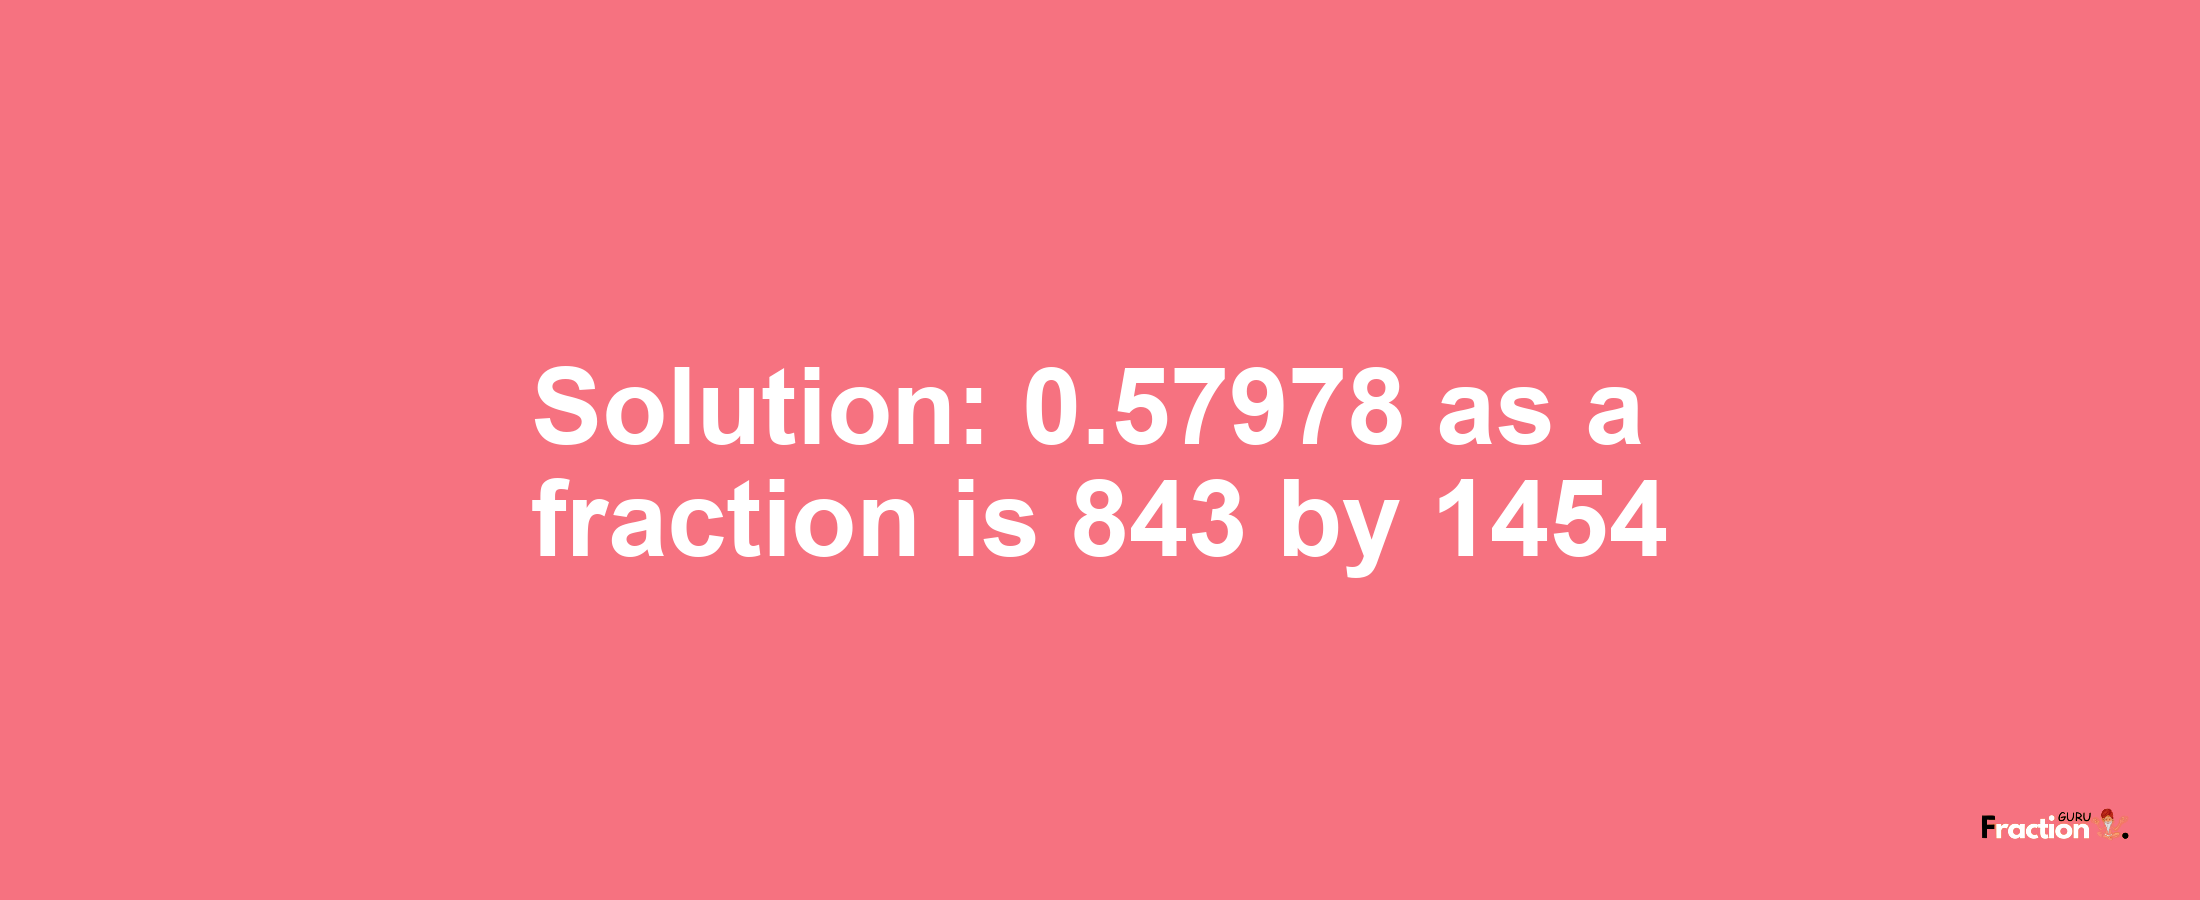 Solution:0.57978 as a fraction is 843/1454